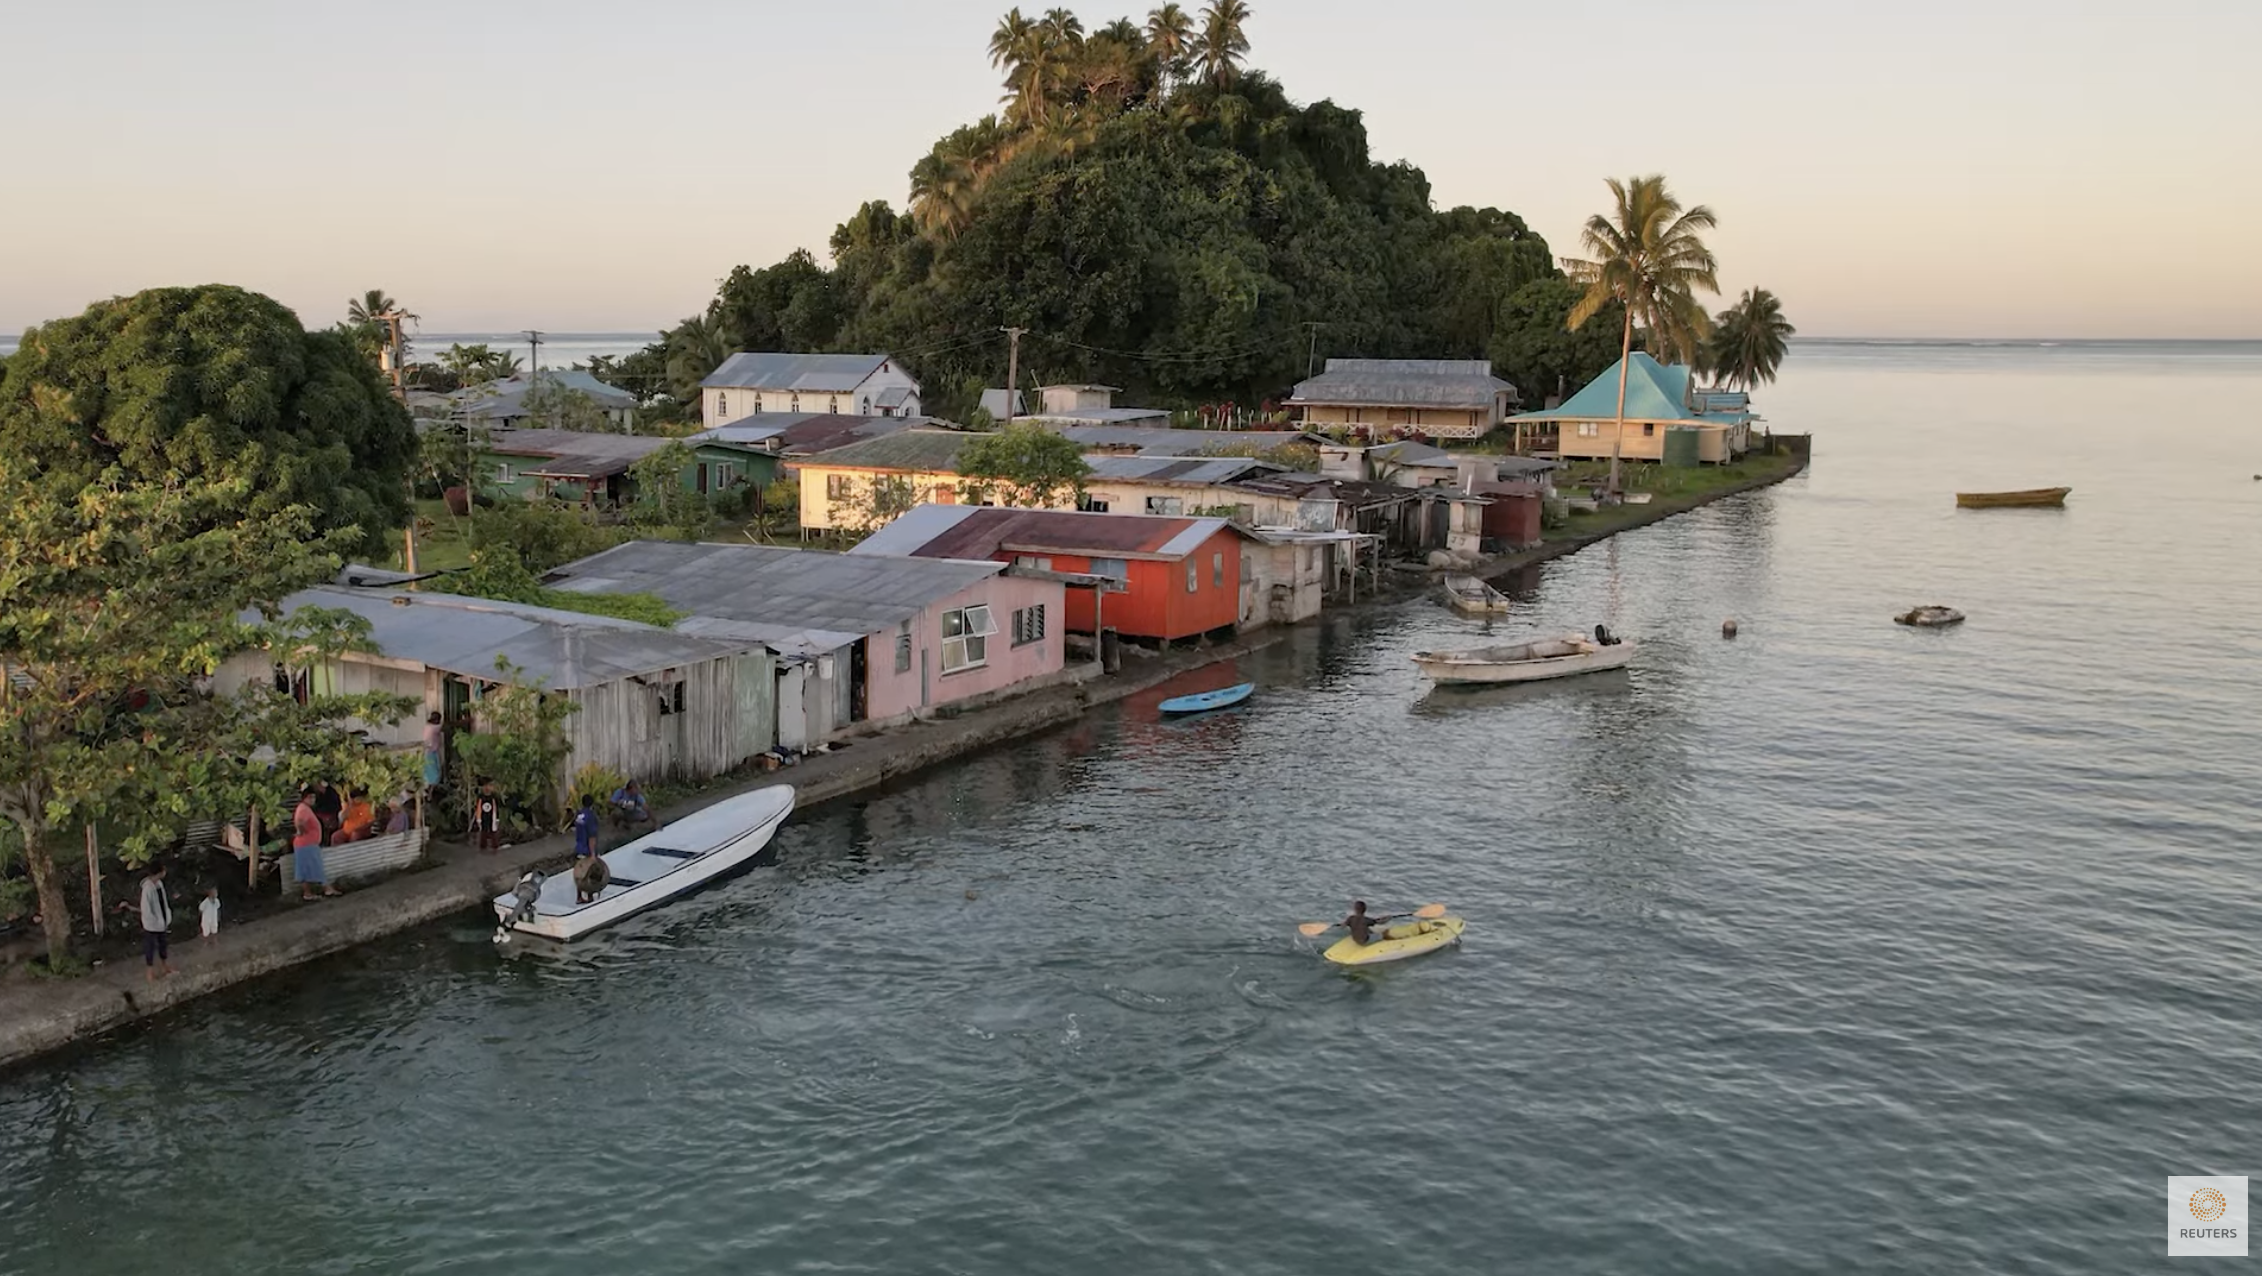 Screenshot from Reuter's video "Stay or Flee? Fijians forced to abandon disappearing homes" via Youtube.